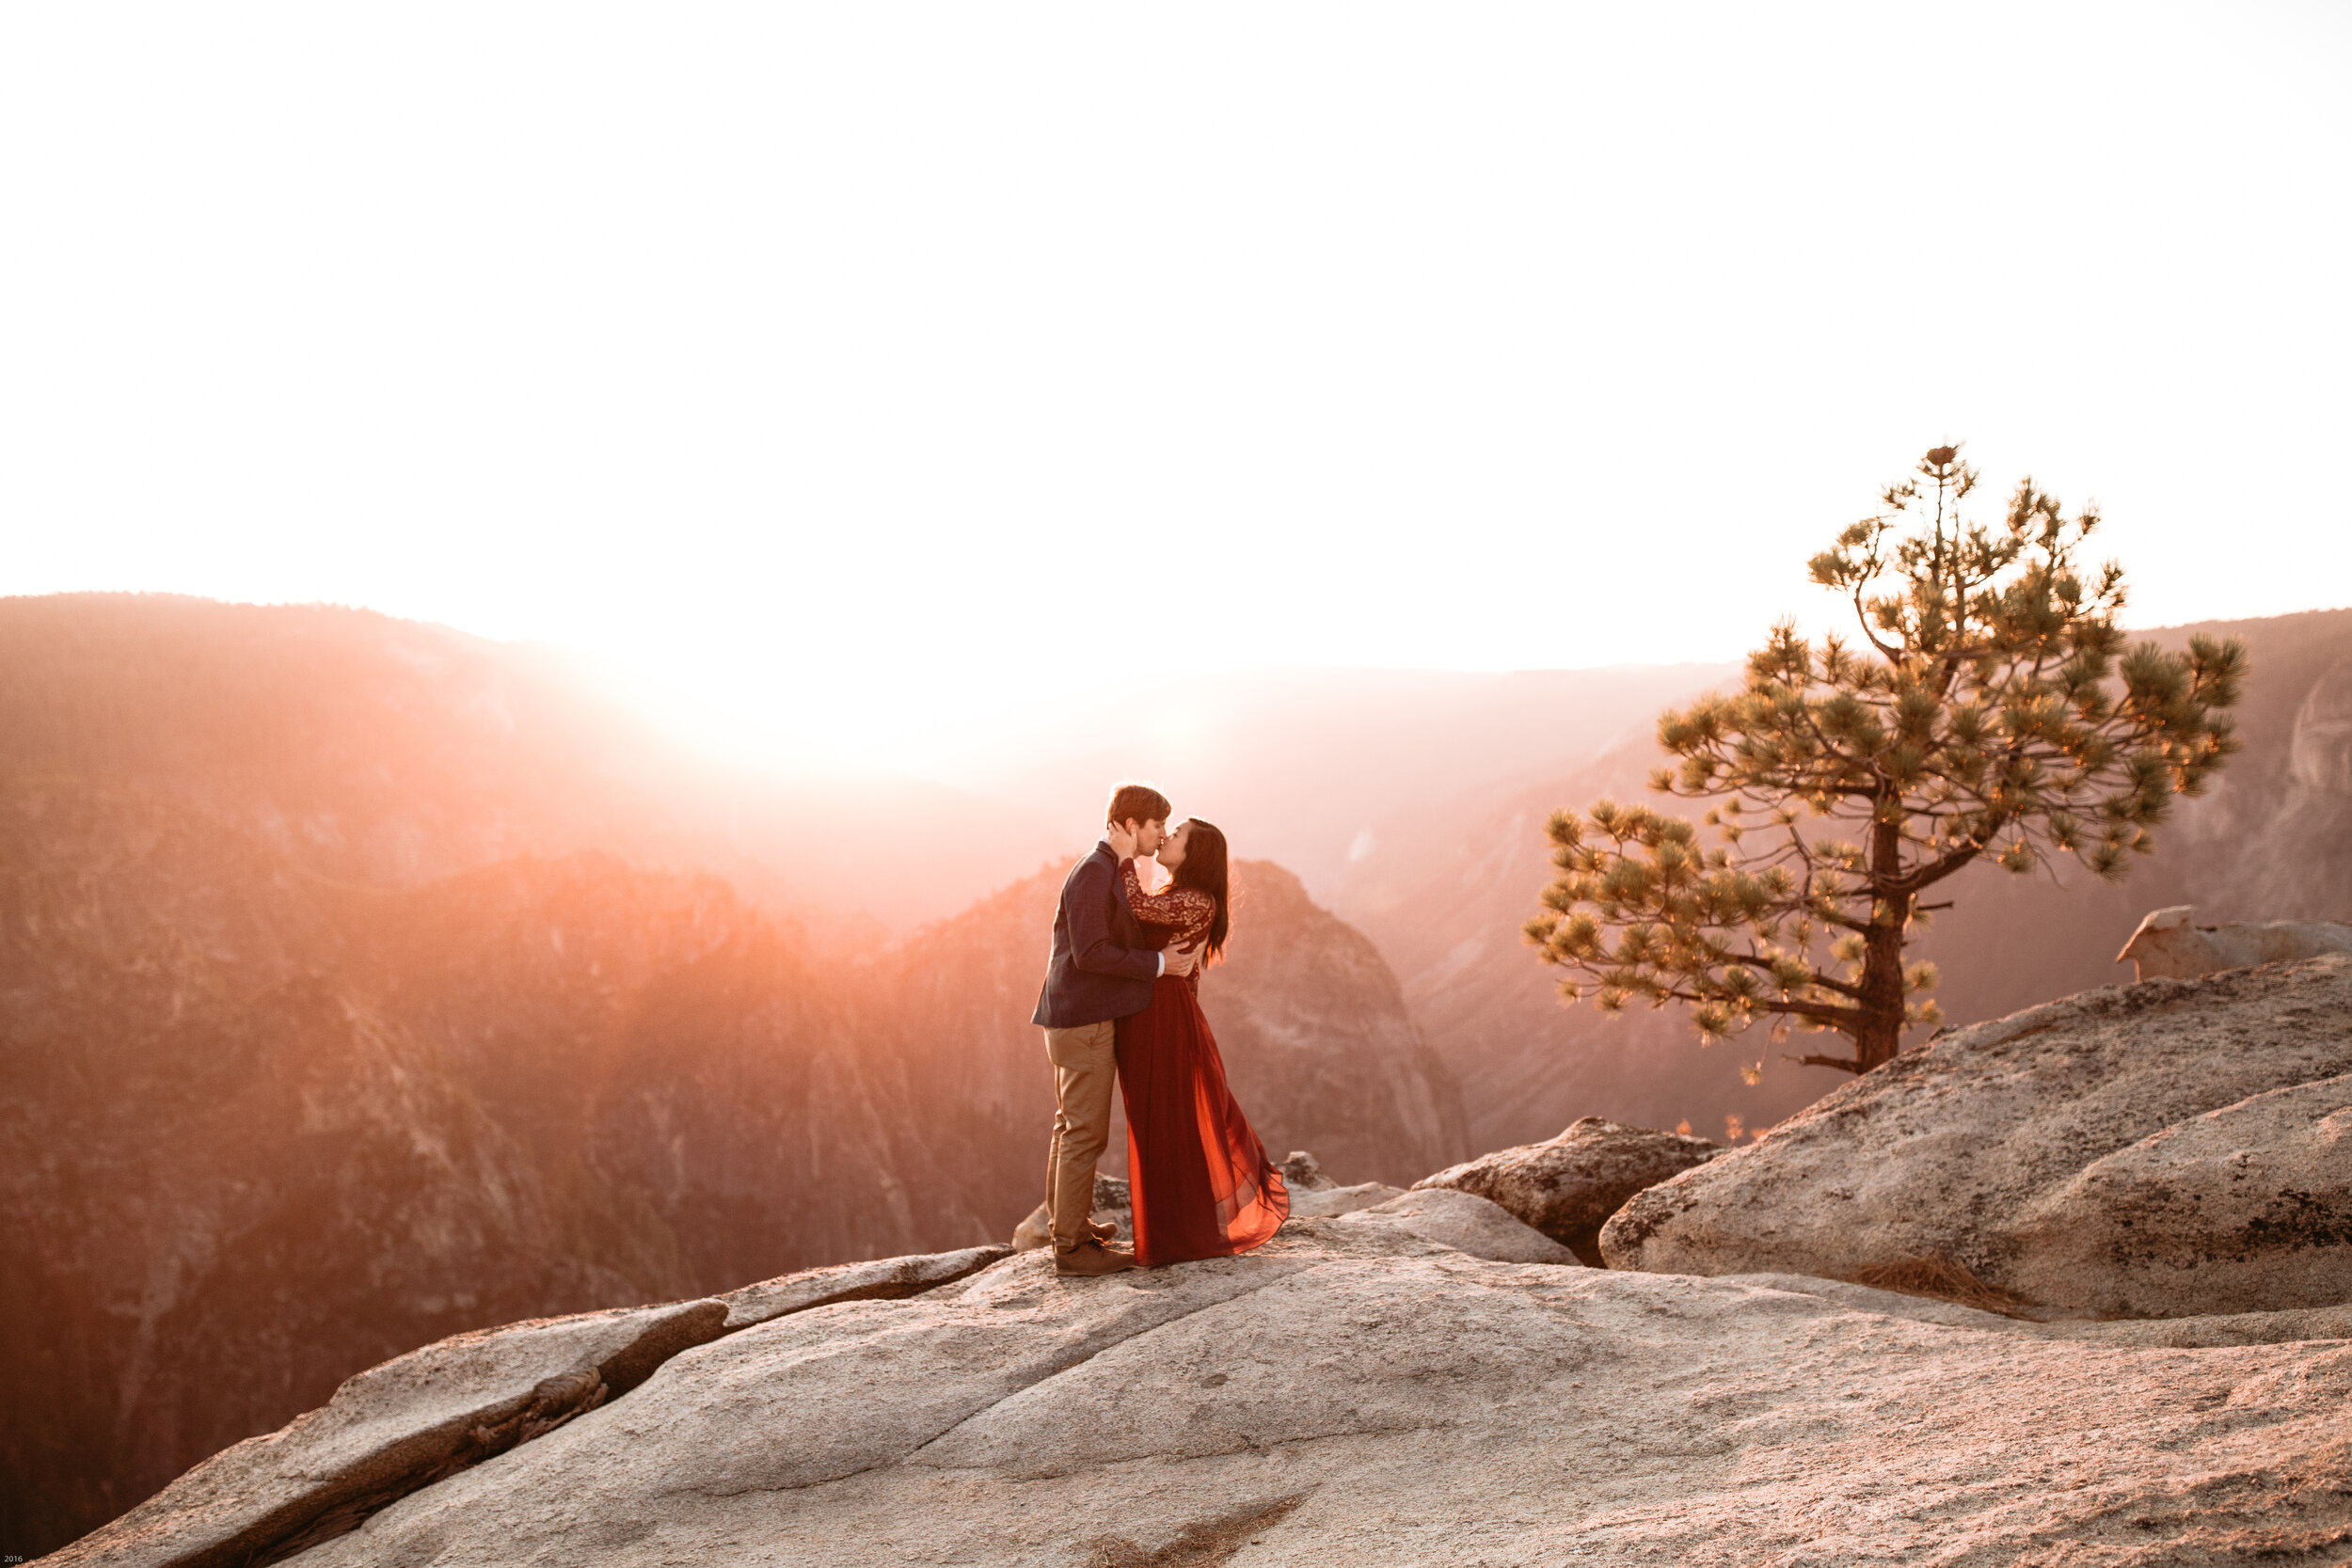 yosemite-national-park-couples-session-at-taft-point-and-yosemite-valley-yosemite-elopement-photographer-nicole-daacke-photography-162.jpg